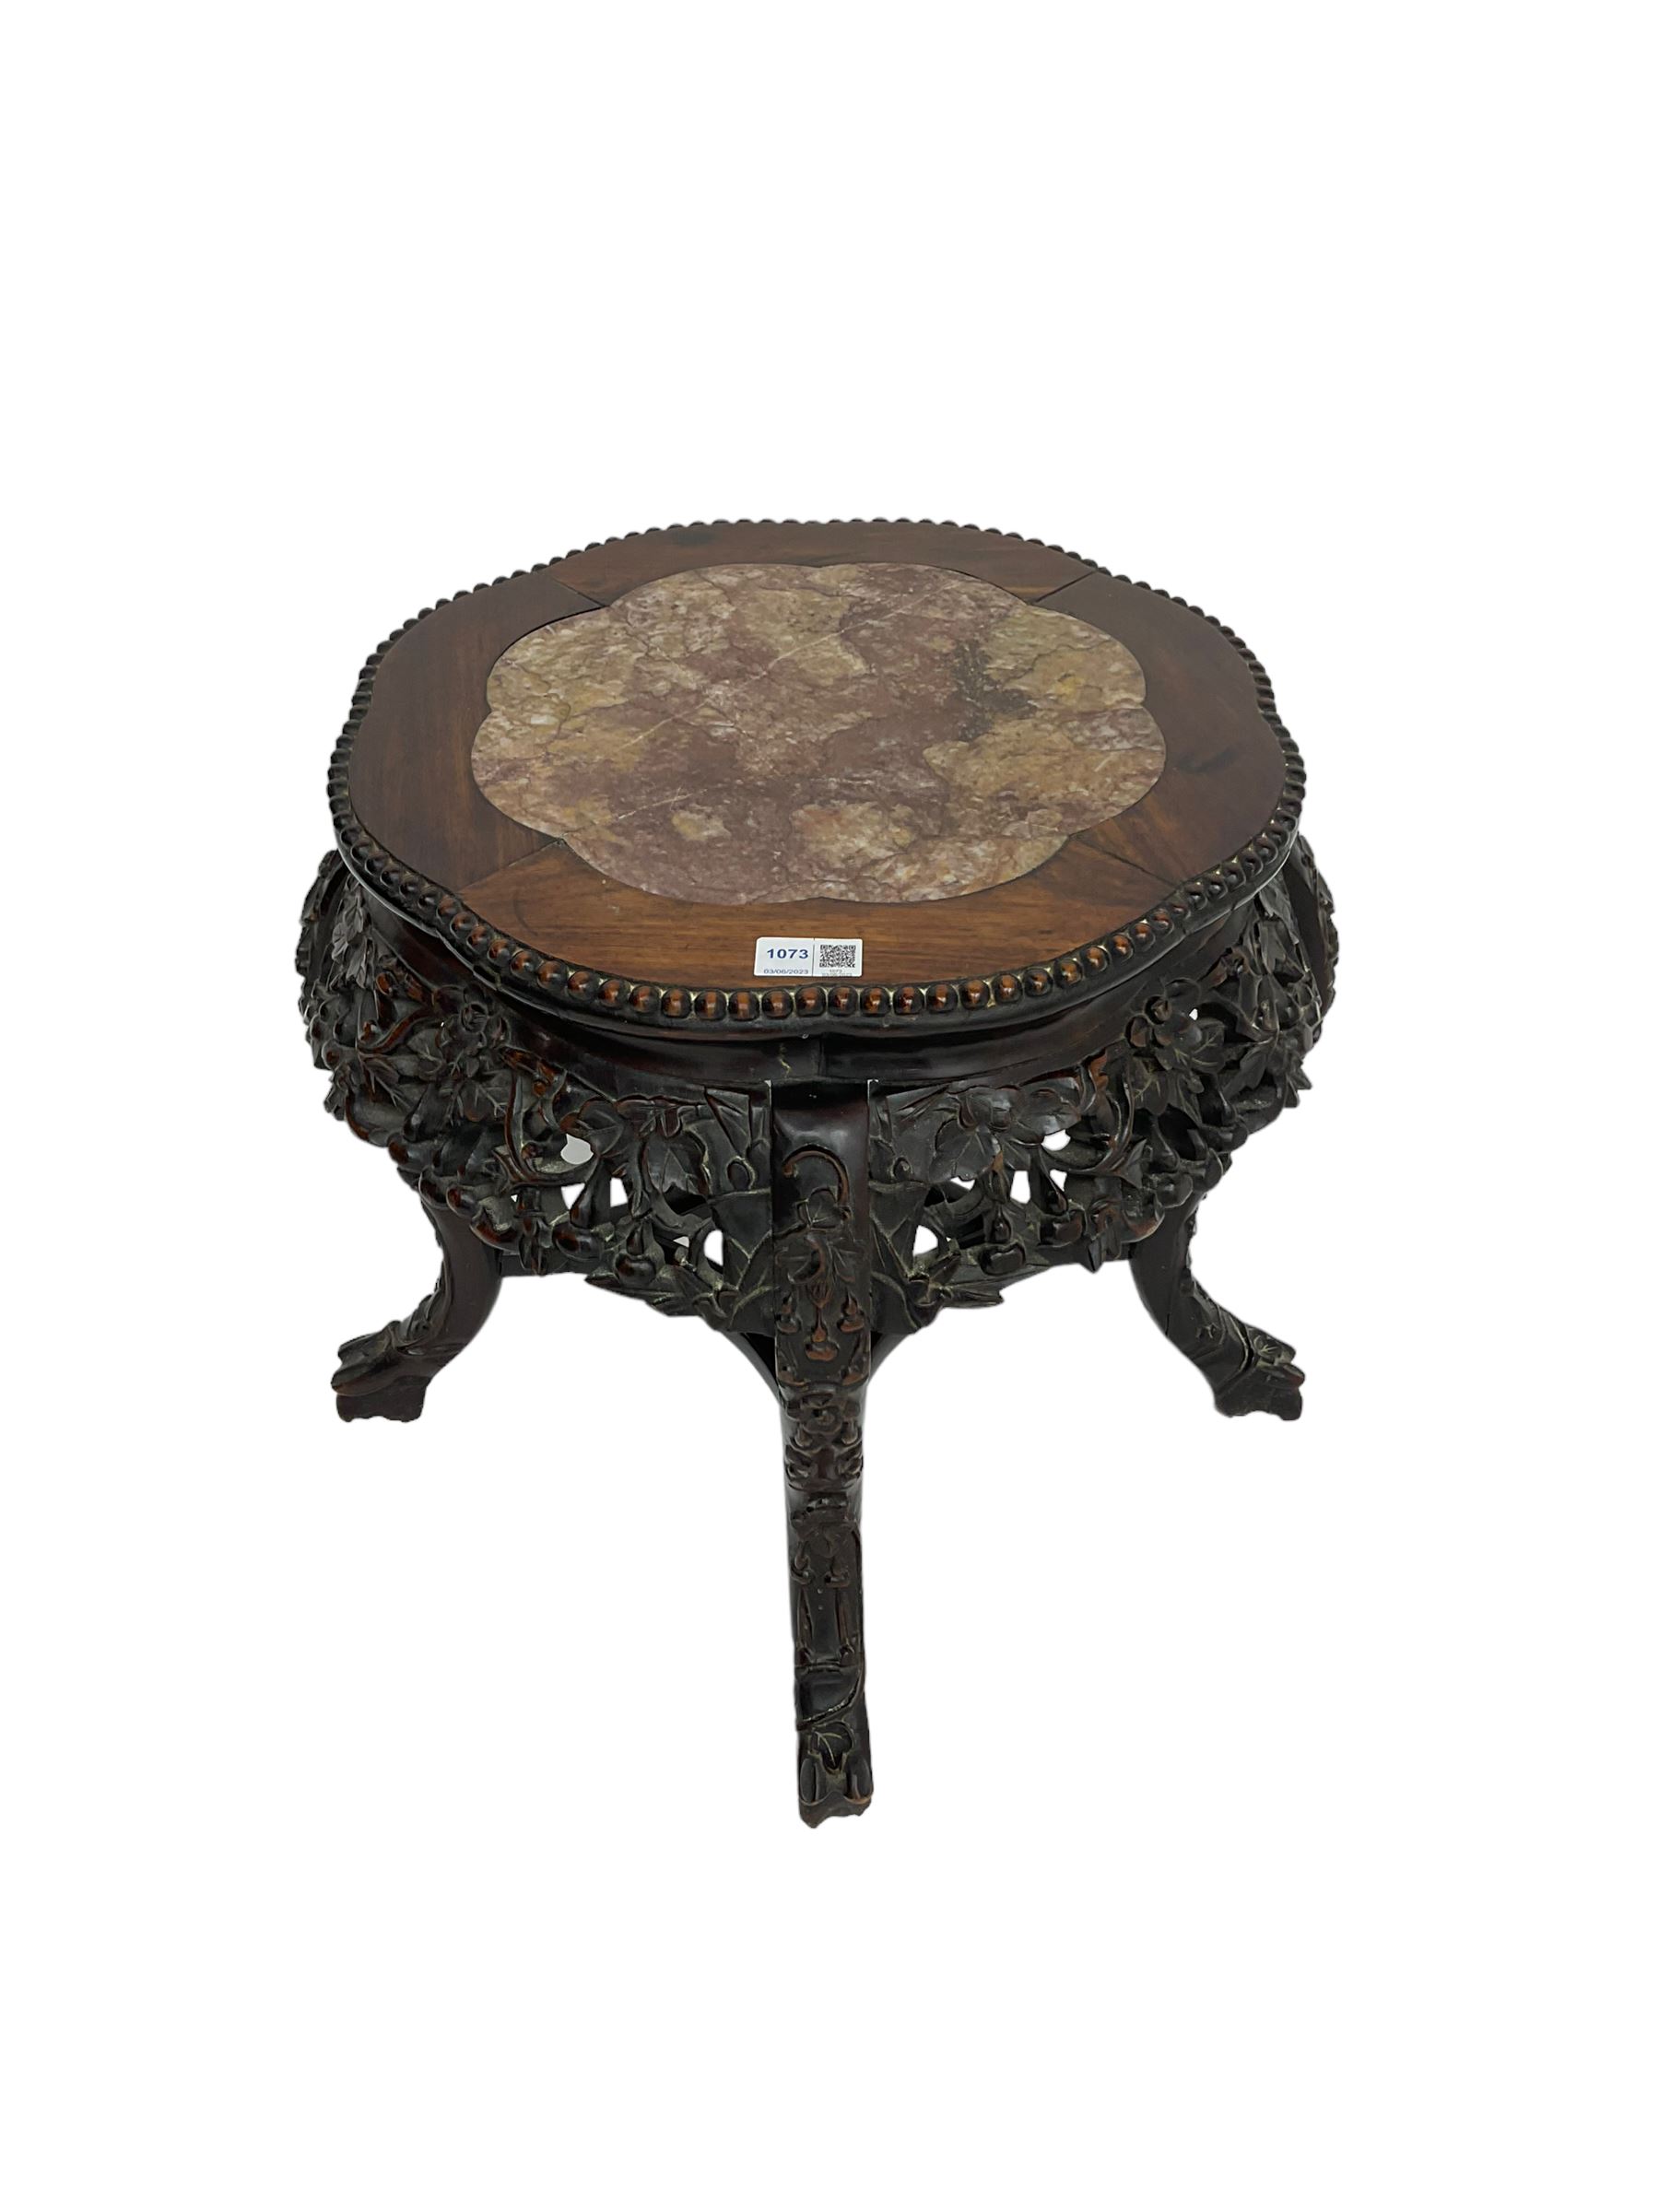 Chinese carved hardwood occasional table - Image 5 of 5